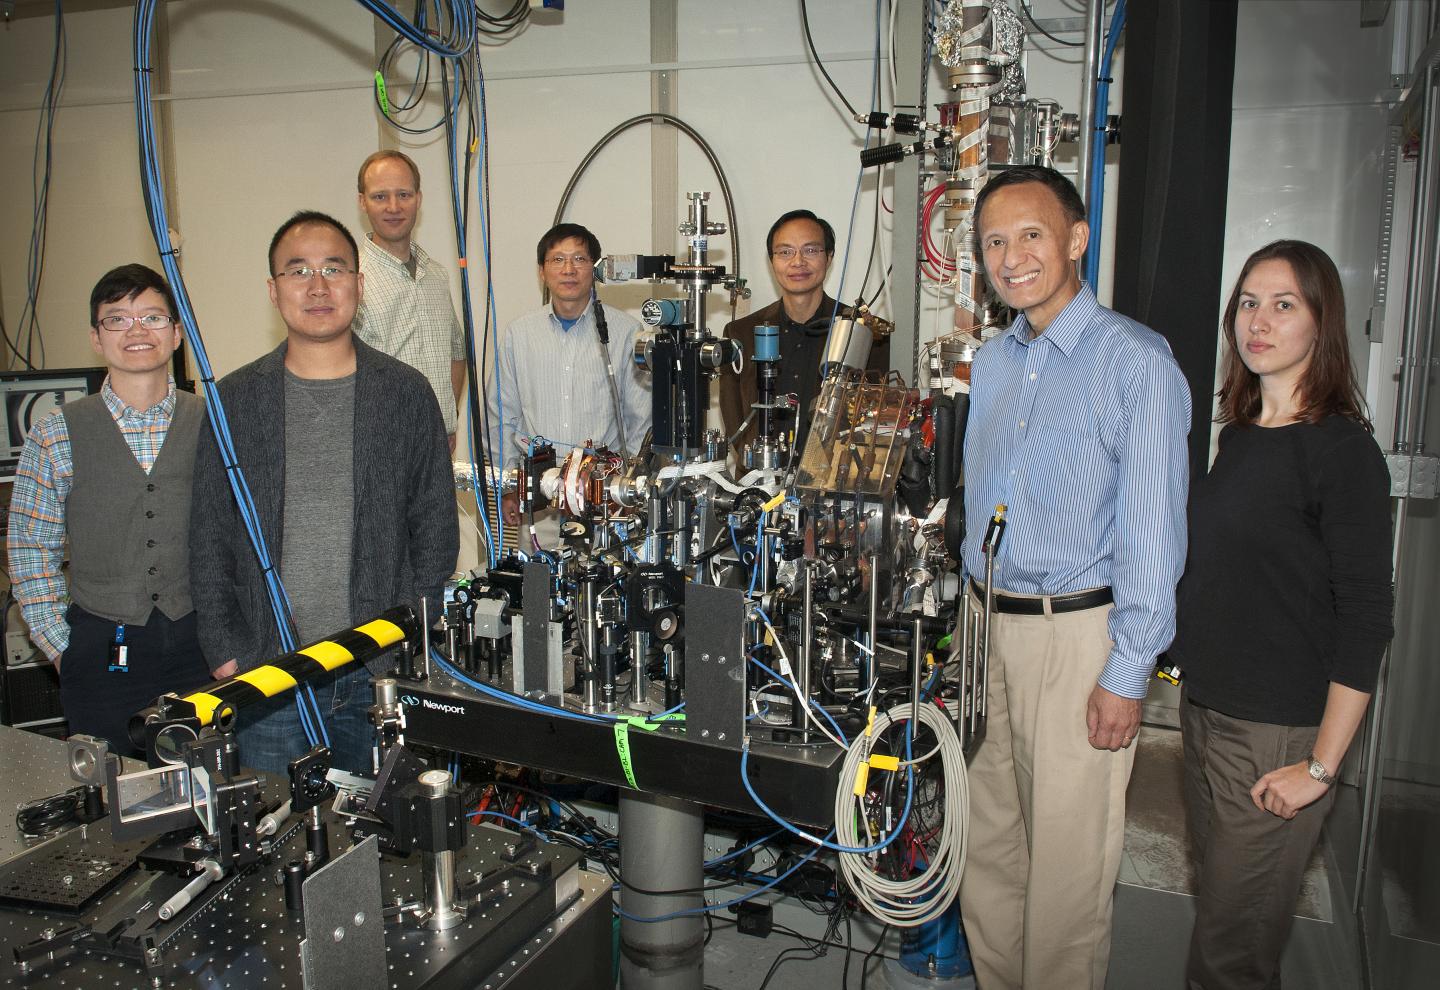 Yimei Zhu and Scientists Group Photo